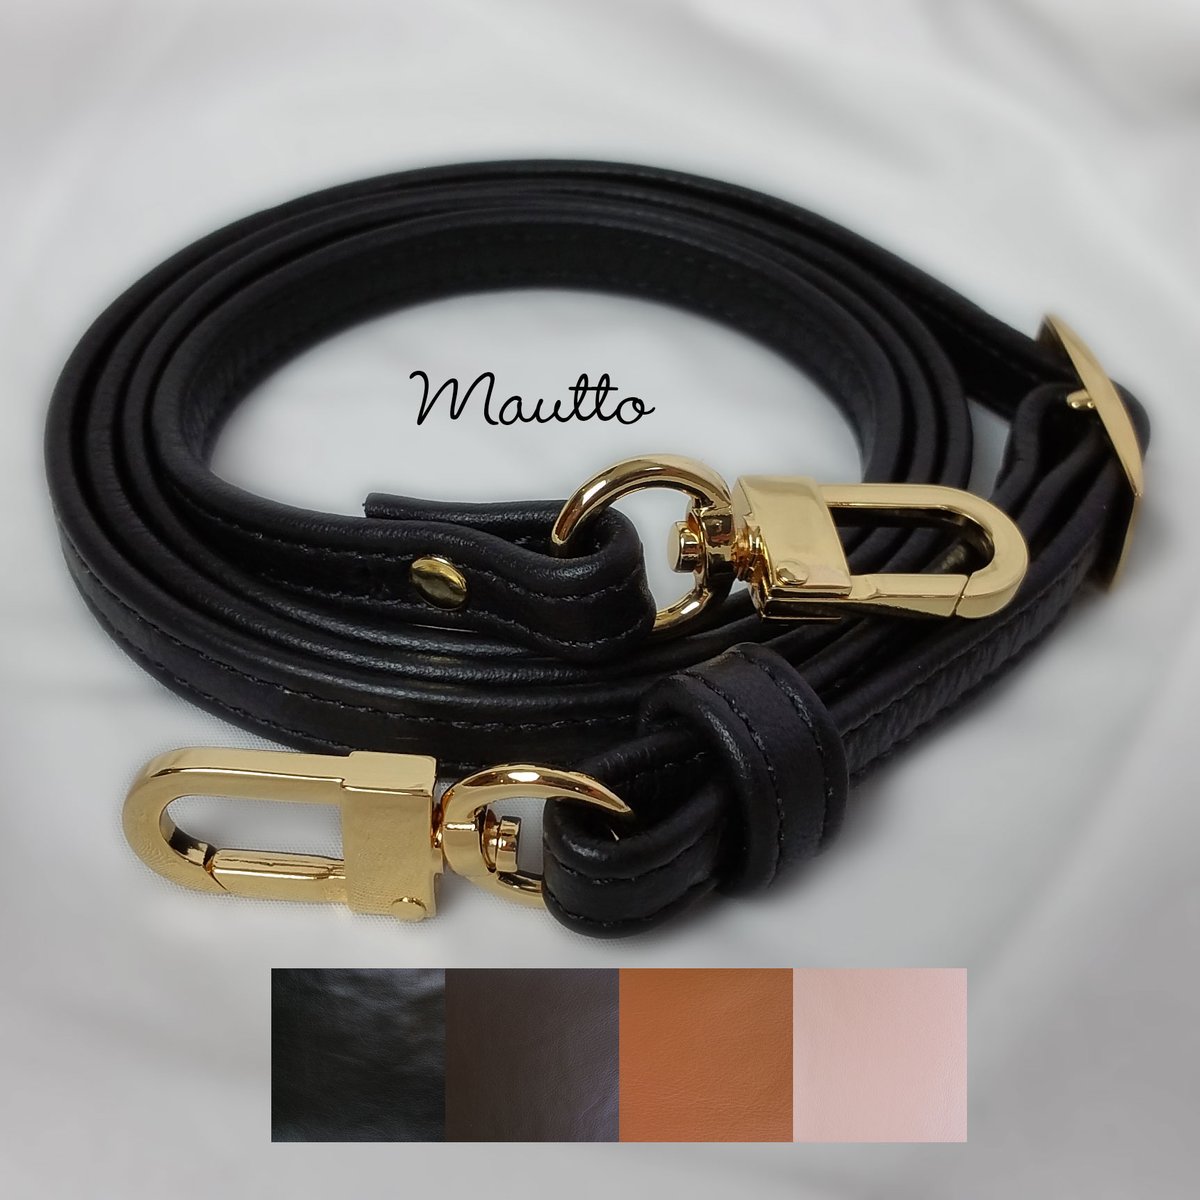 Adjustable Shoulder to Crossbody Leather Strap - 1 inch Wide – Mautto